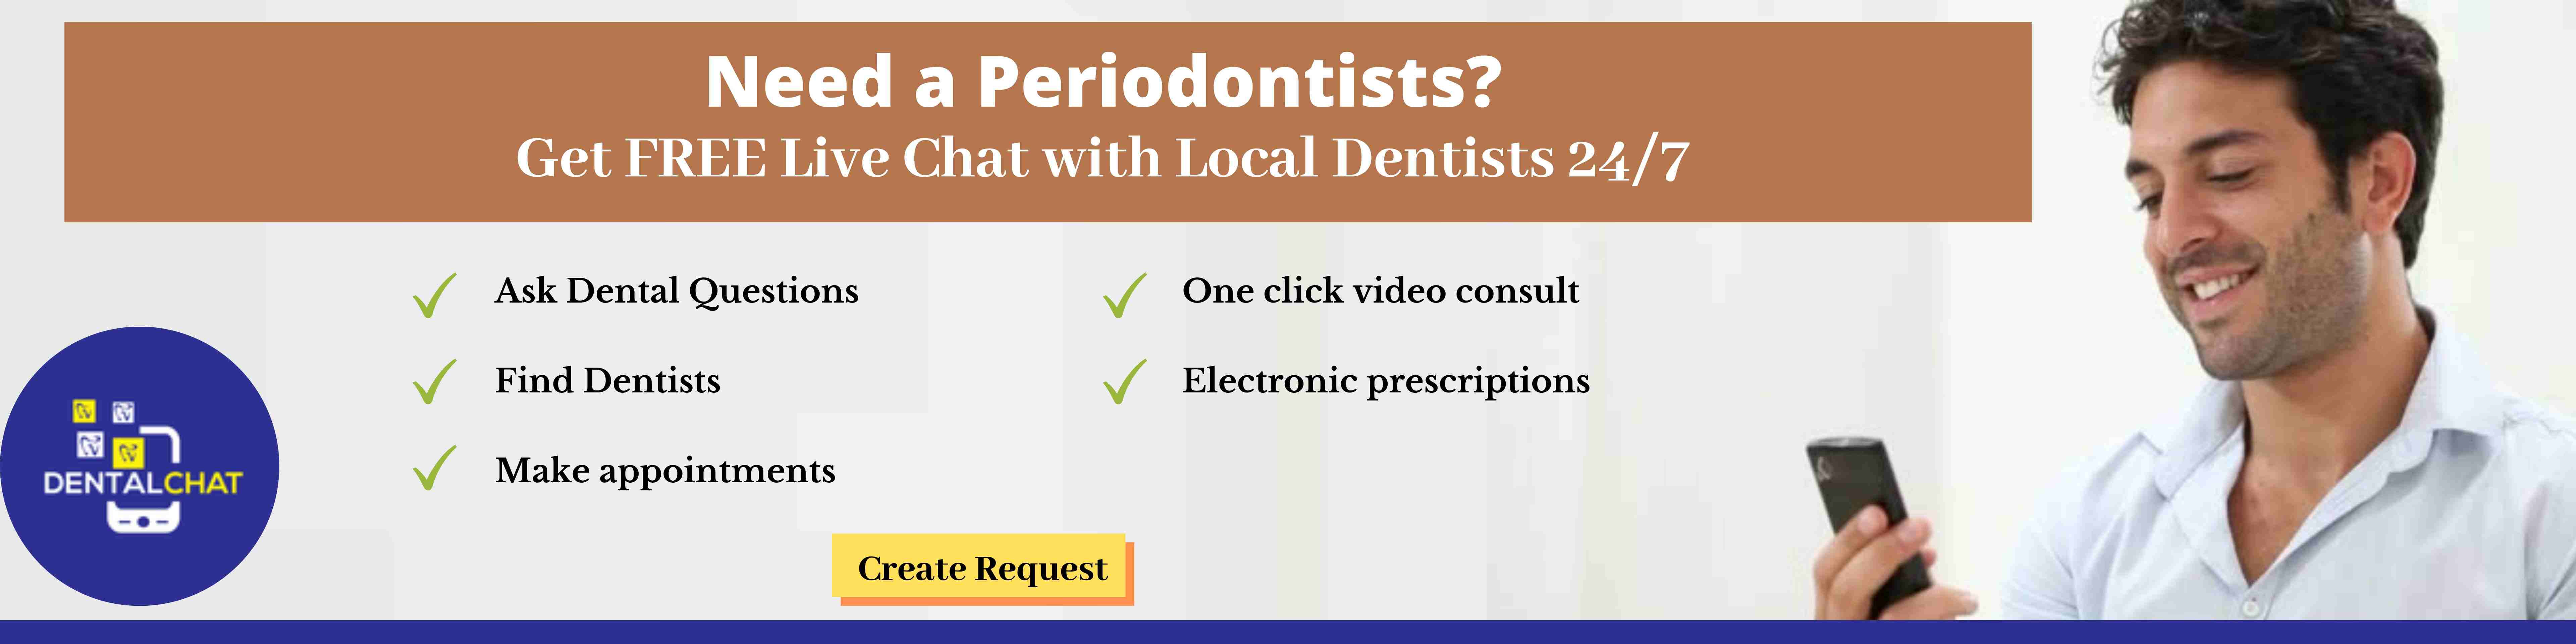 Periodontitis Chatting, Perio Treatment Chat, Local Periodontist Blog, Online Periodontitis Discussion: